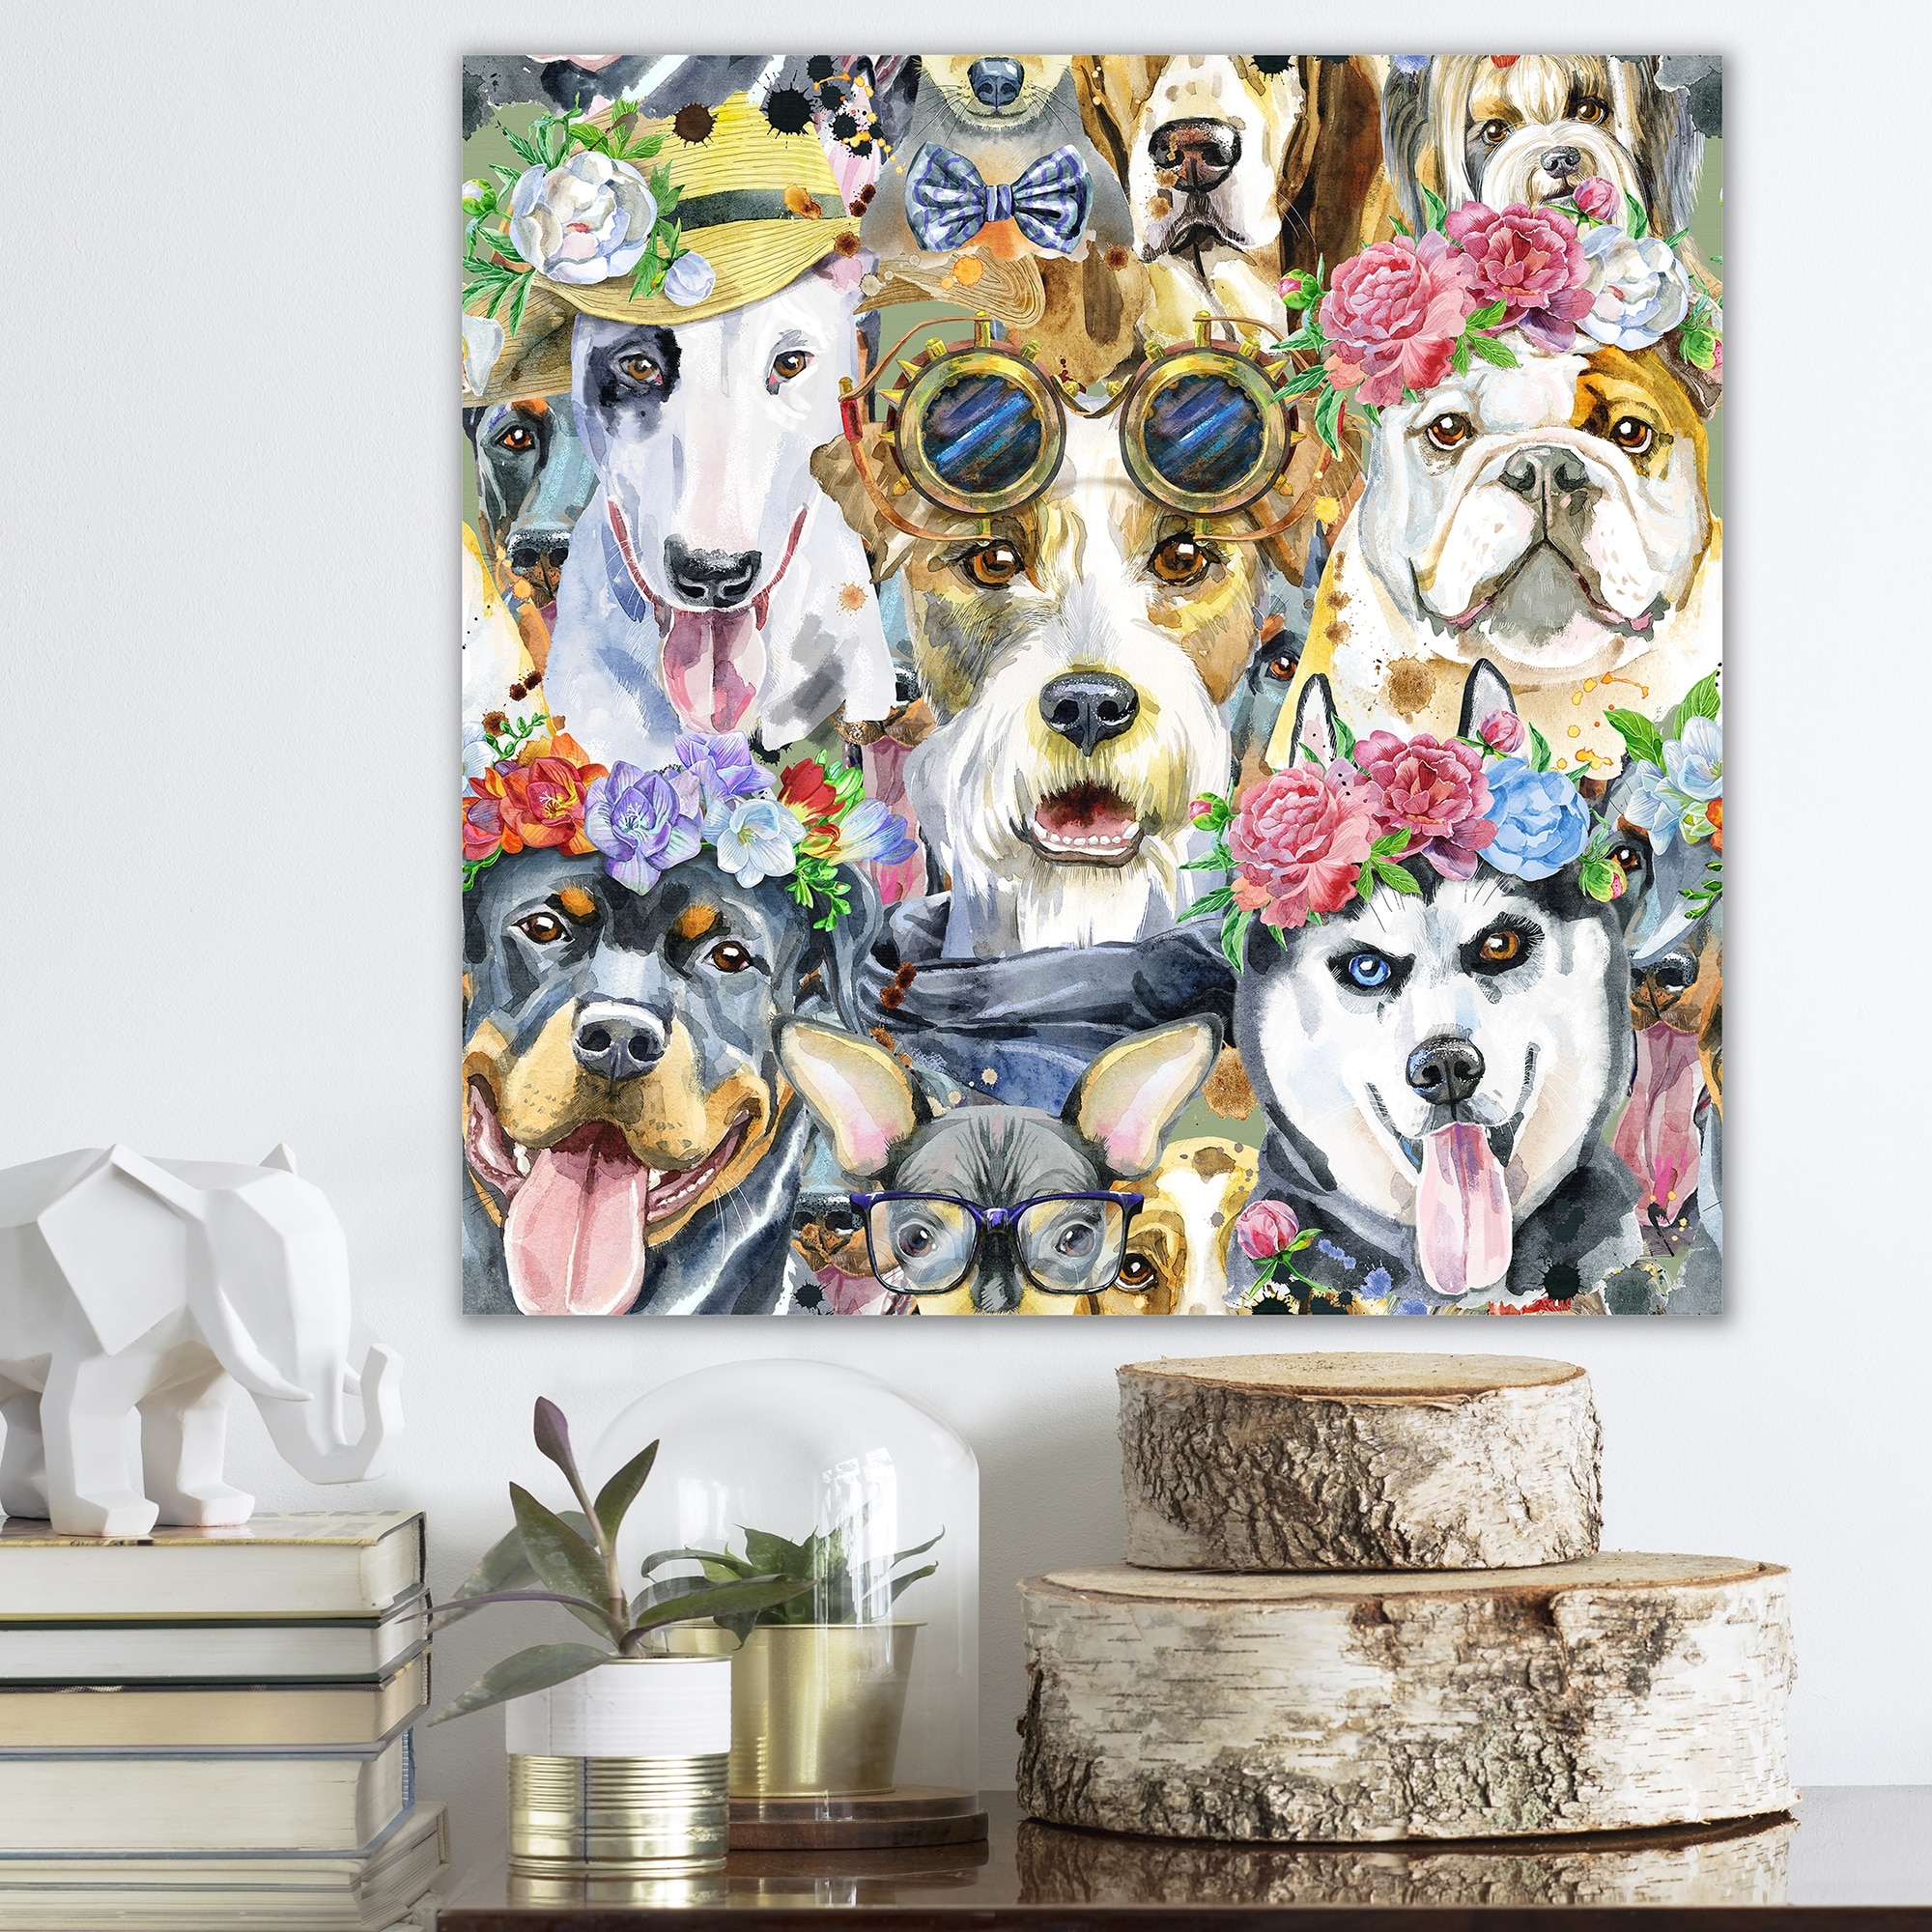 Designart undefinedWatercolor Collage Of Dog Portraits Iundefined Animals  Canvas Wall Art Print - Overstock - 32336413